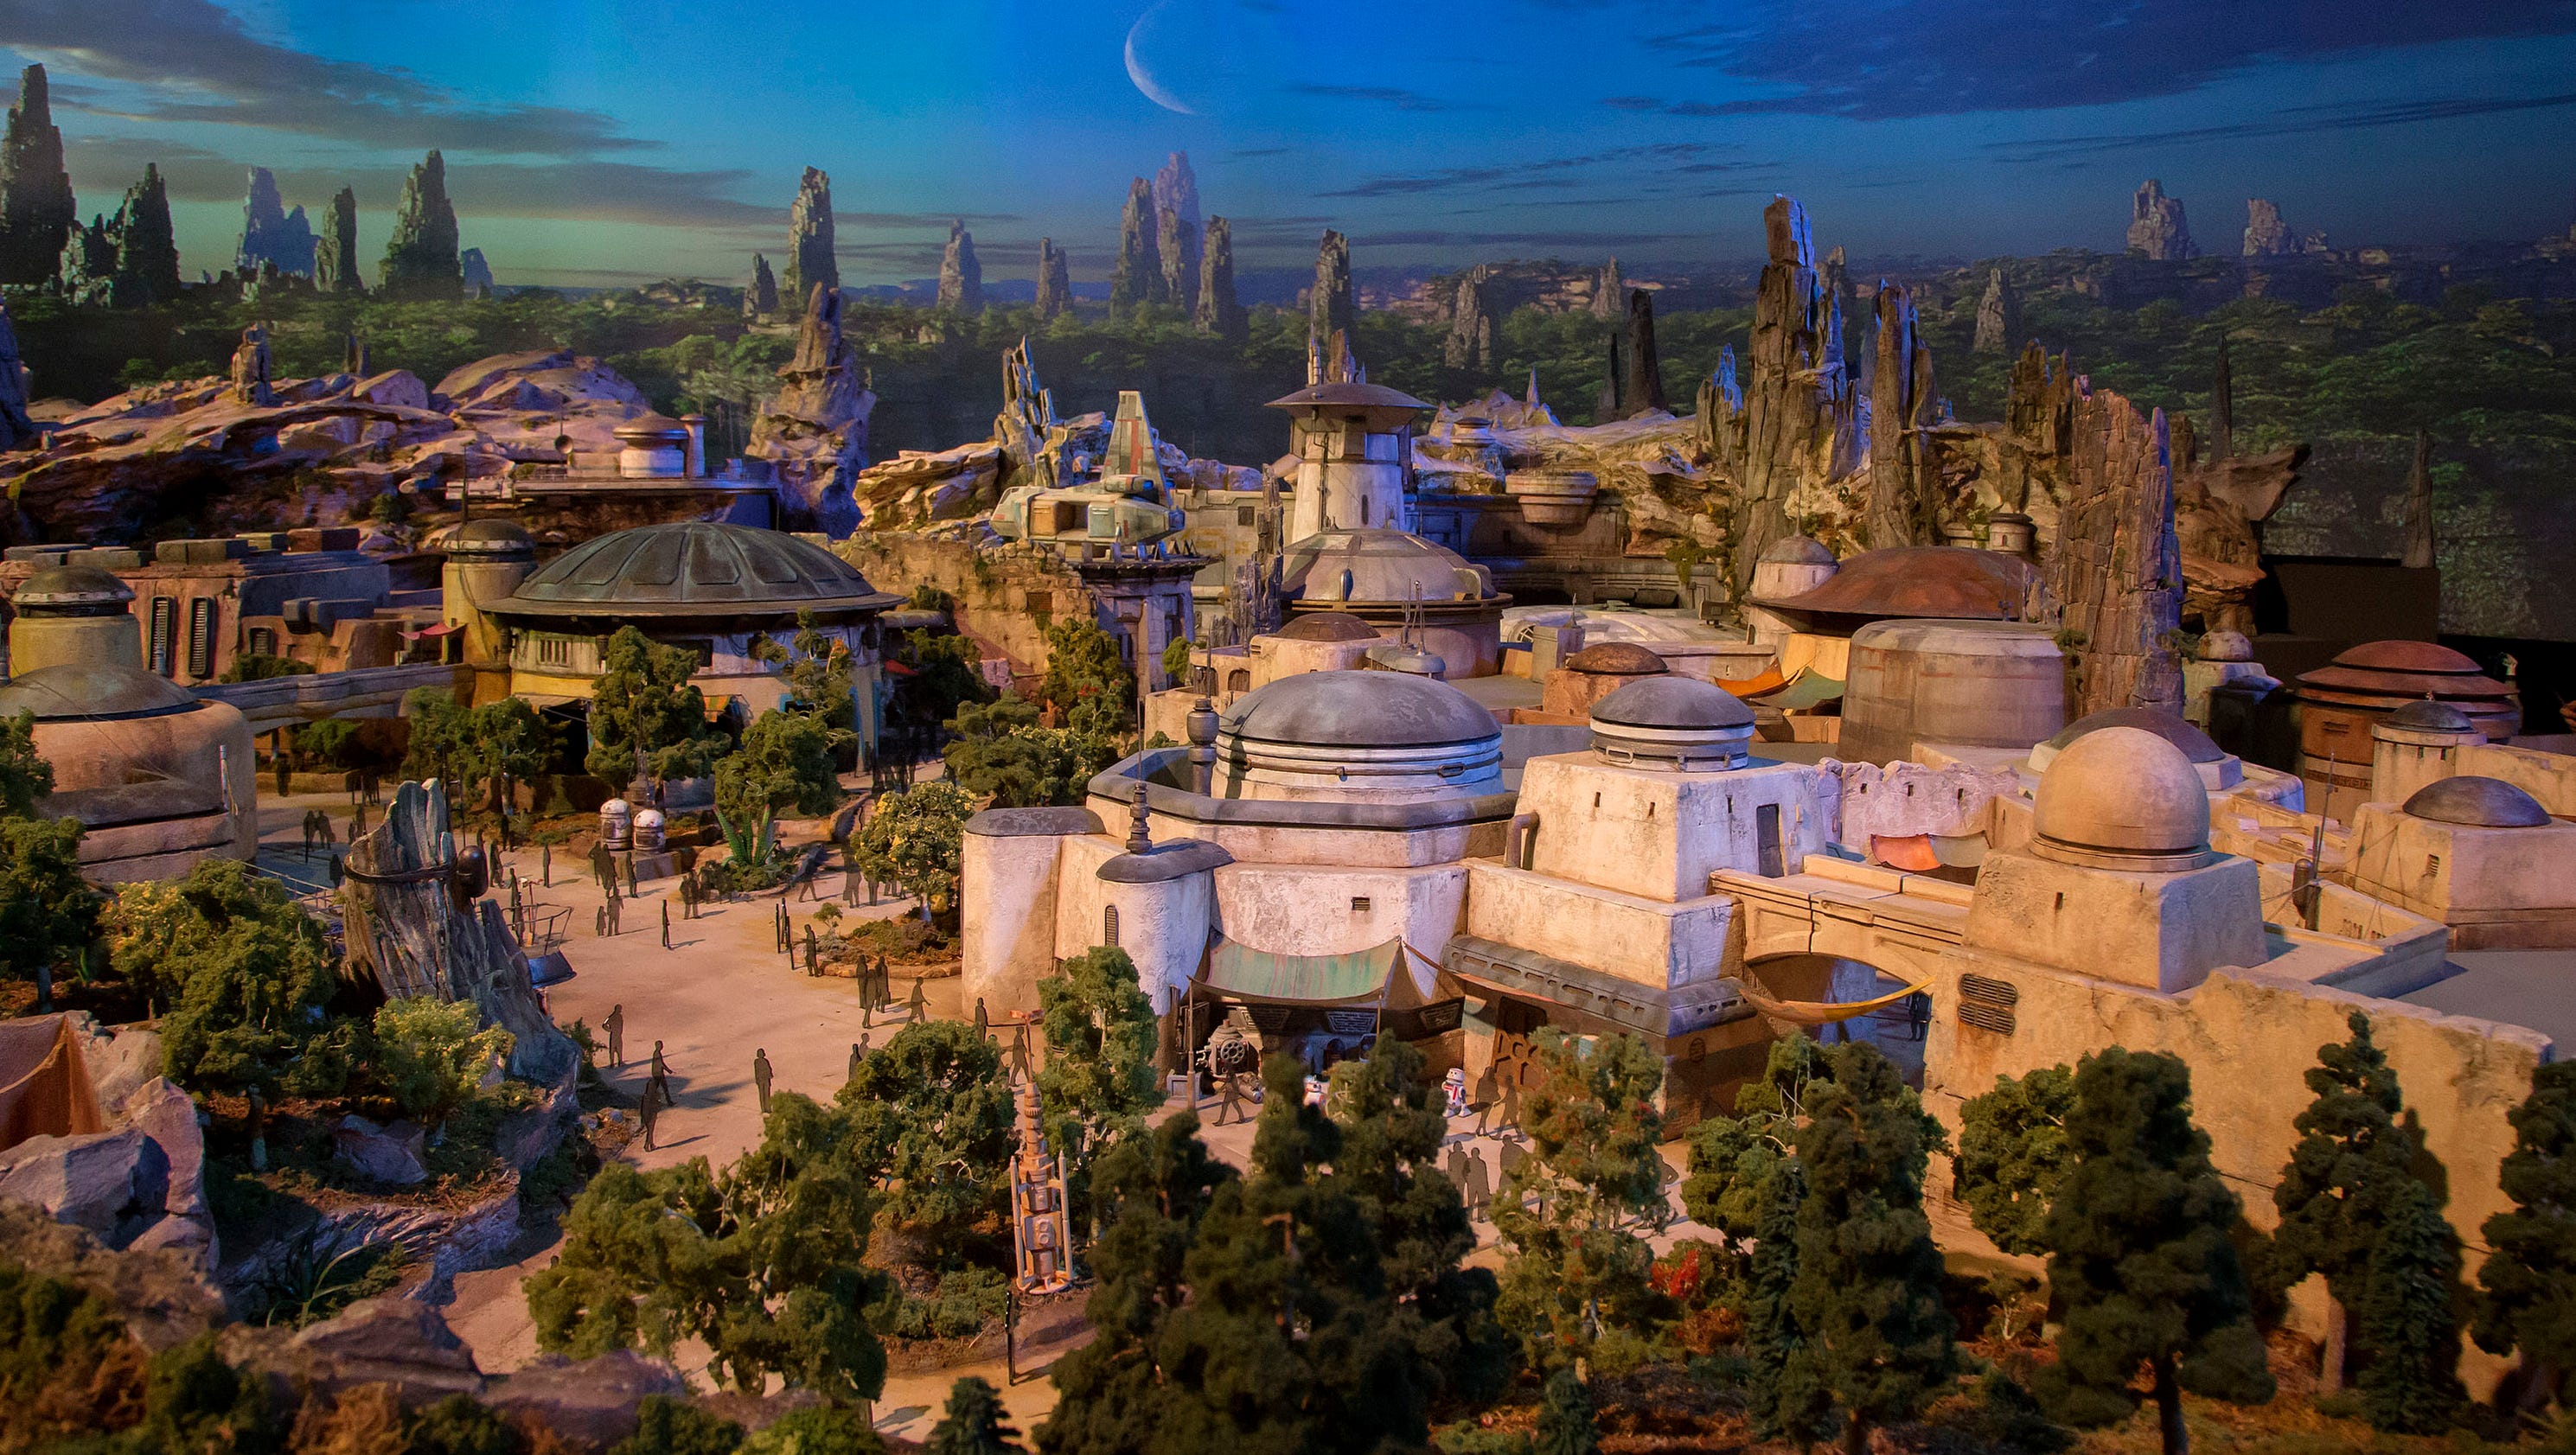 Star Wars-themed land to open in summer 2019 at Disneyland, fall 2019 at Disney World